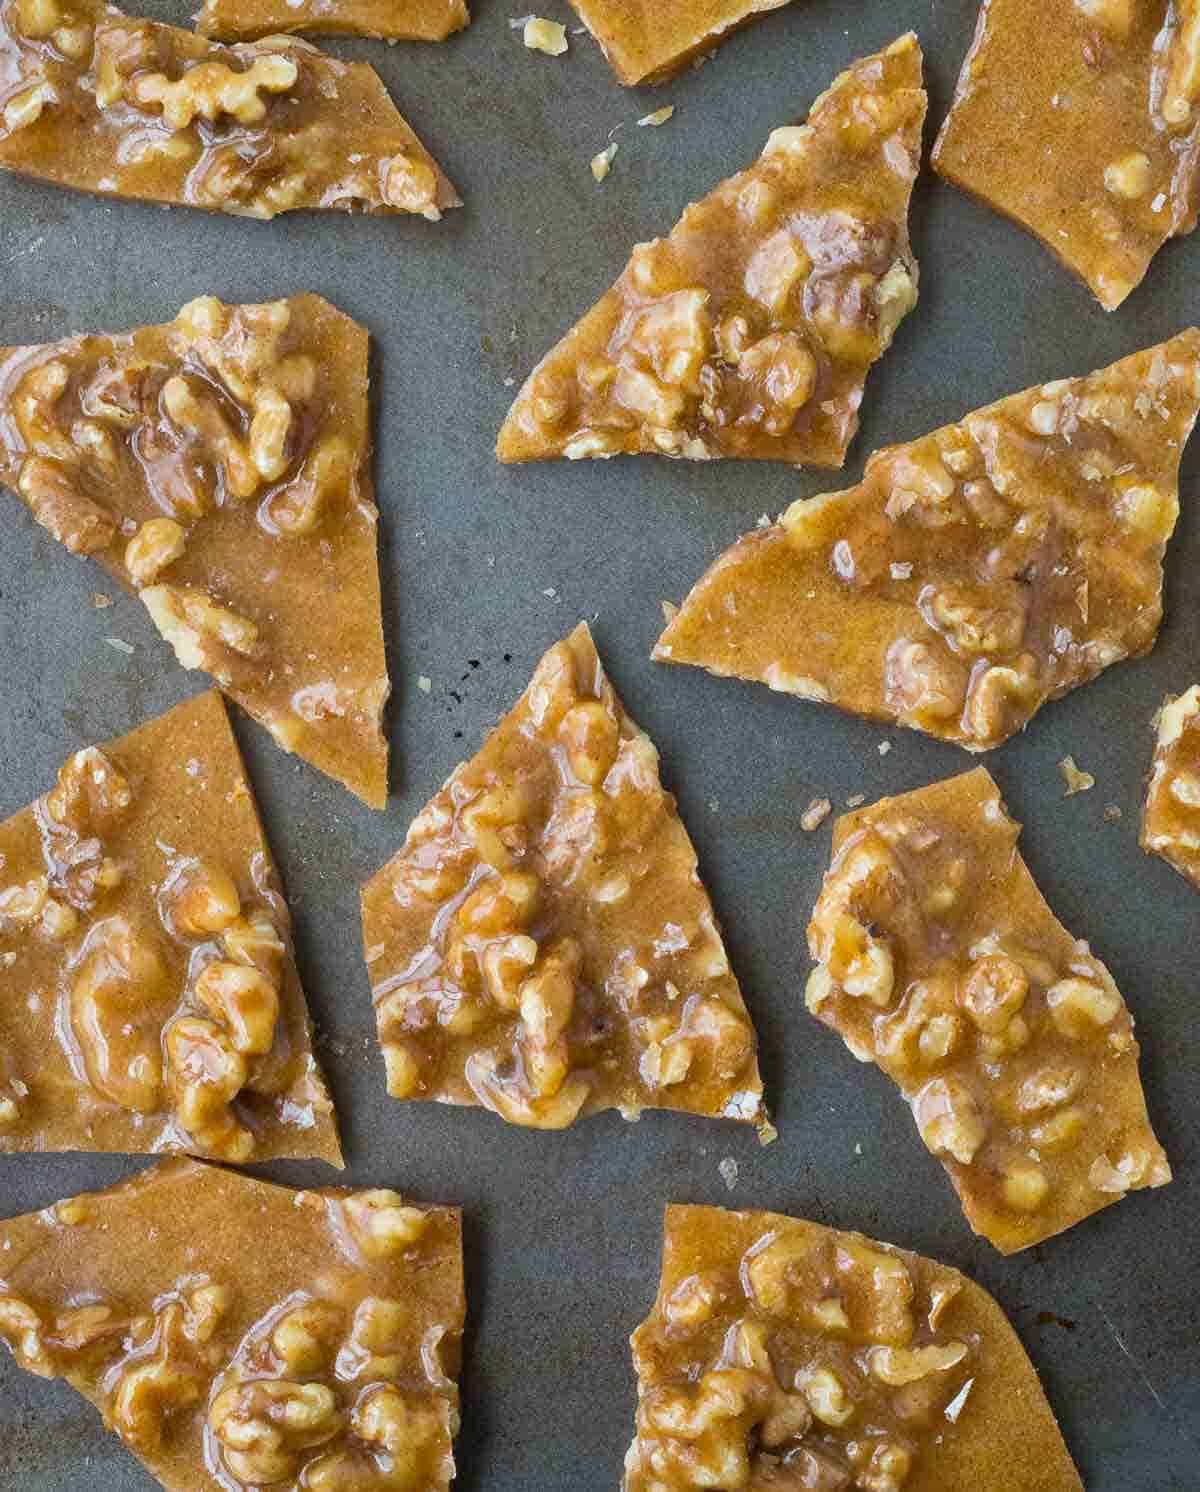 Pieces of walnut brittle on a grey background.